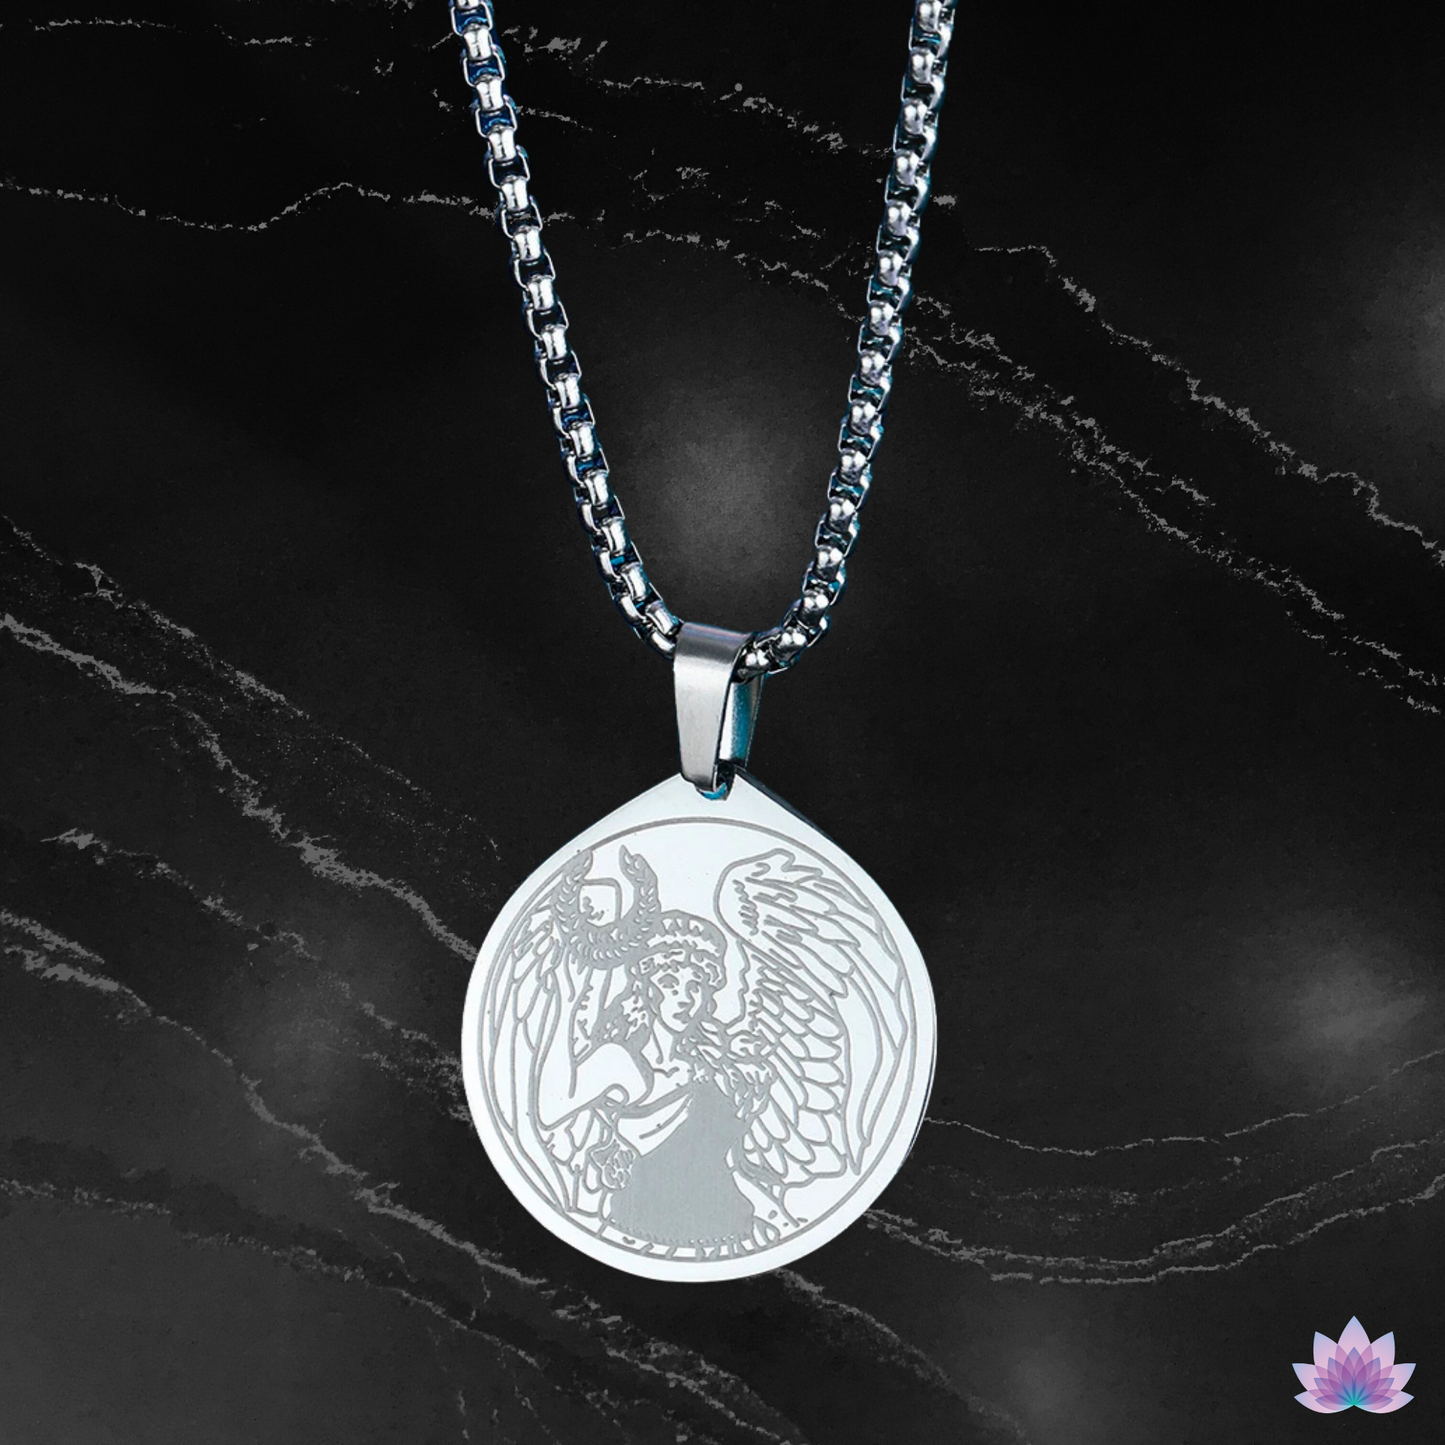 Nike Goddess of Victory Necklace • Pagan Worship Greek Mythology Amulet For Success Triumph Glory • Championship Winner Jewelry Gift Medal • Apollo Tarot Online Shop